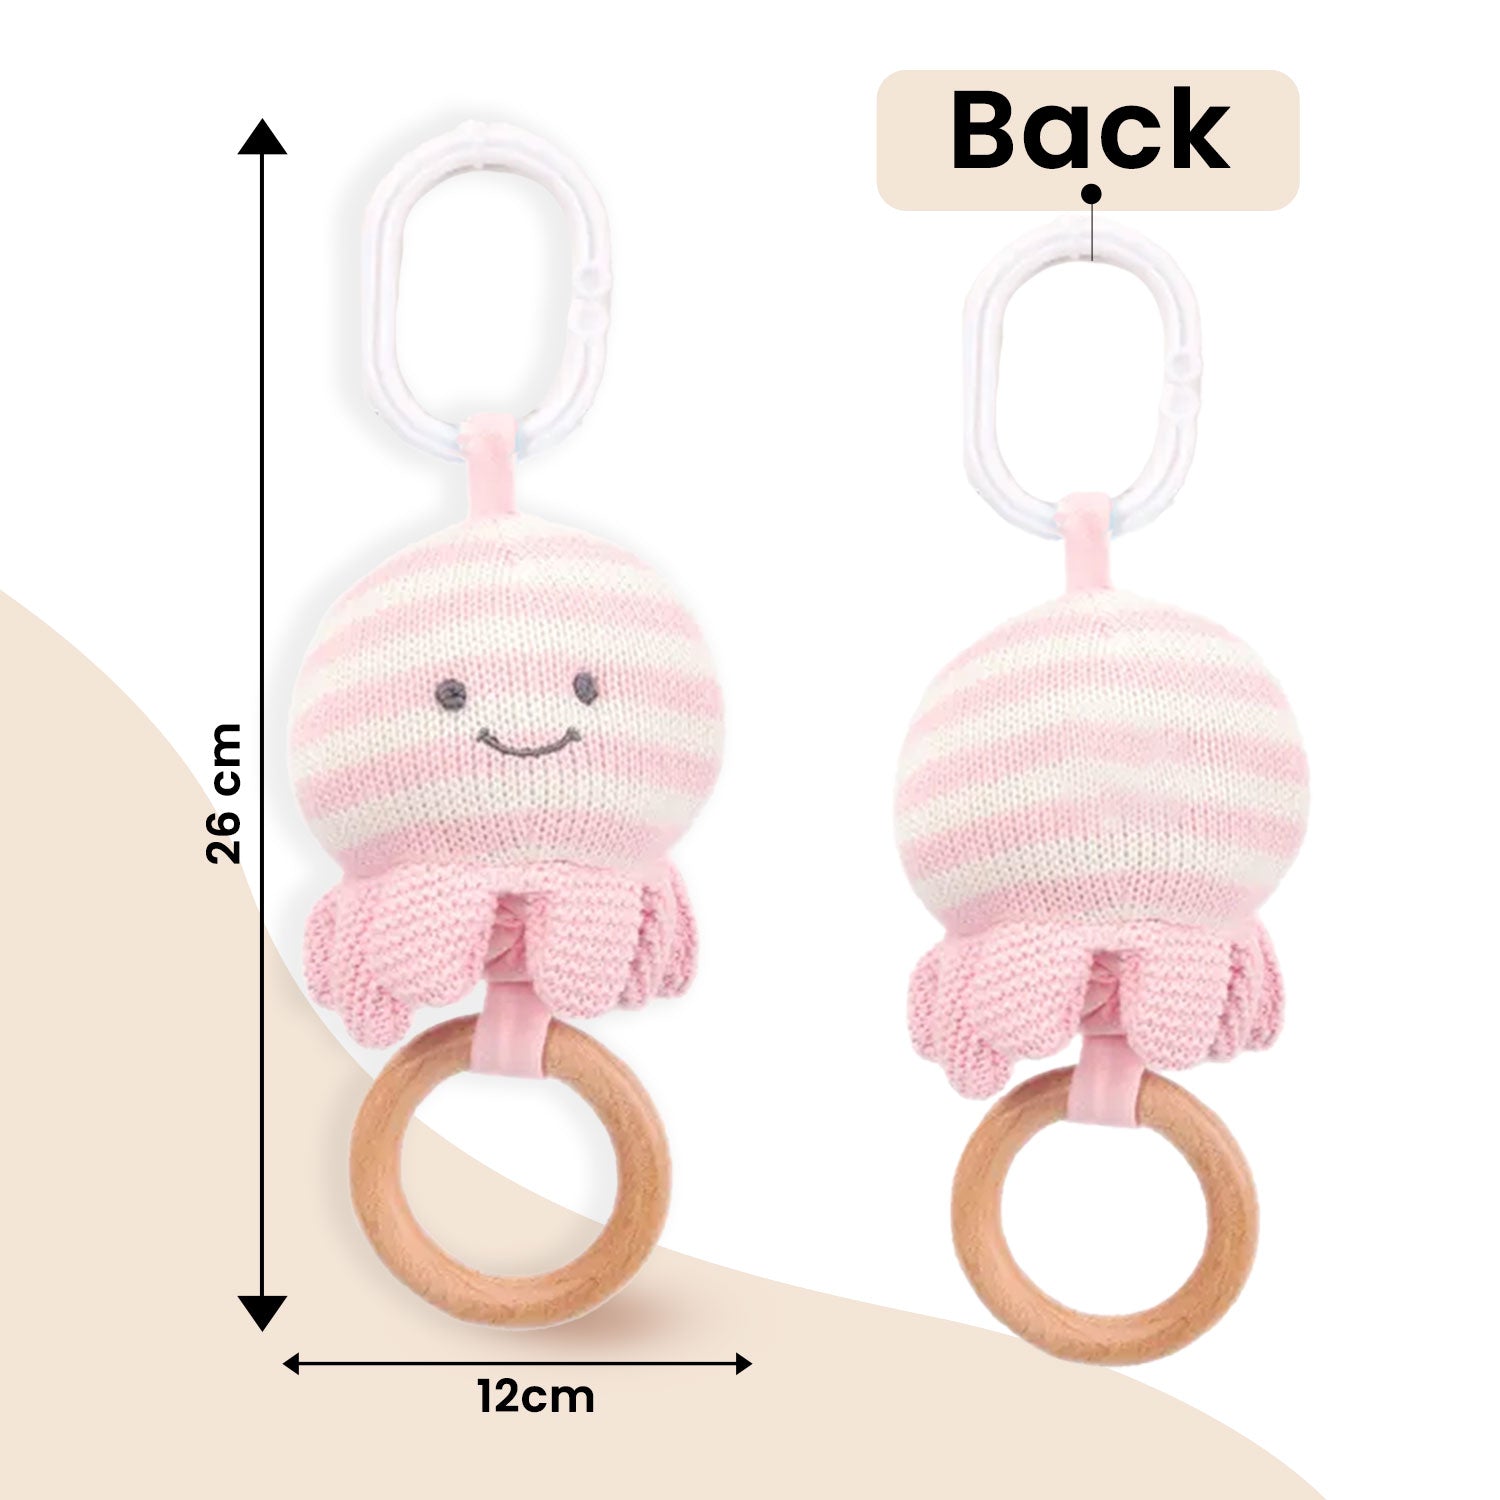 Baby Moo Octopus Wooden Ring Hand Grab Soft Crochet Vibration Pulling Toy - Pink